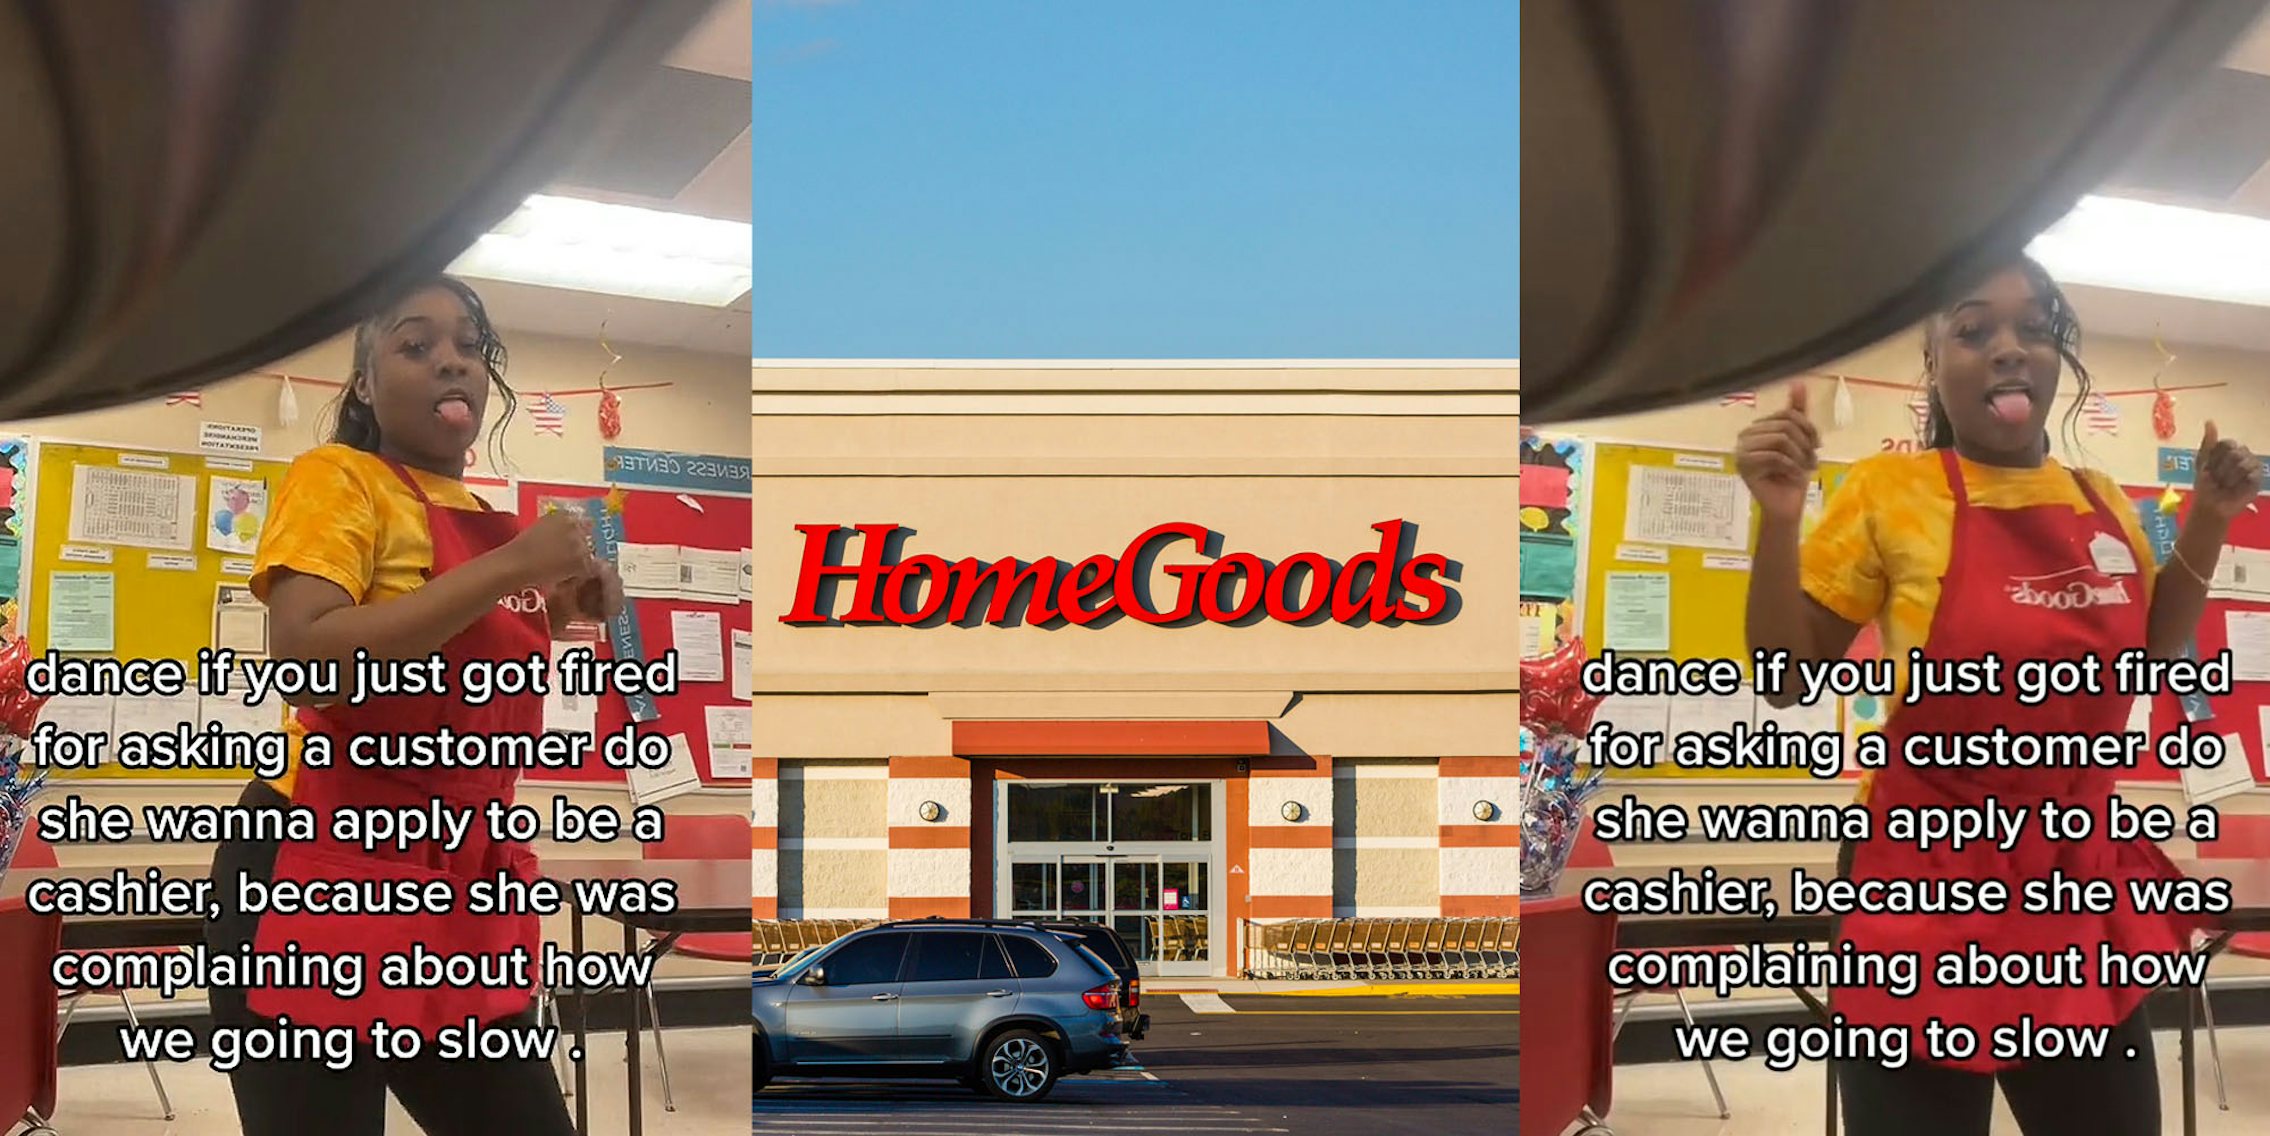 homegoods-worker-fired-for-telling-customer-to-apply-for-job